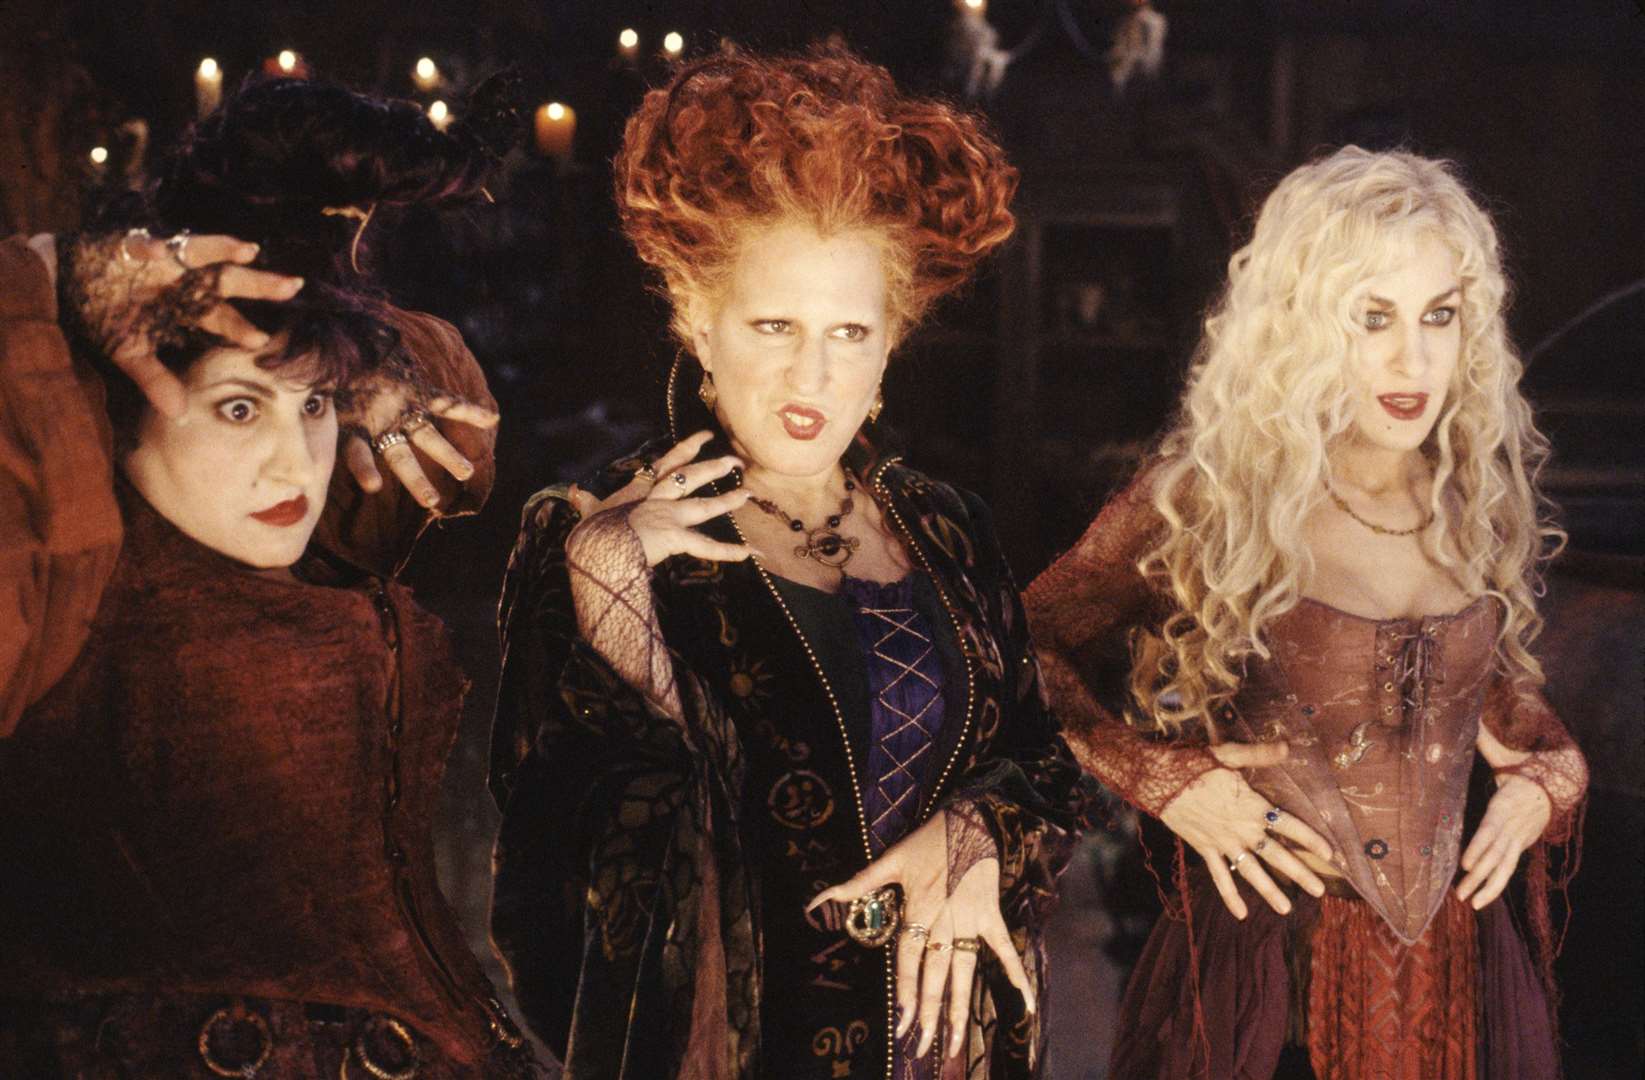 Hocus Pocus, the original returns with Kathy Najimy as Mary Sanderson, Bette Midler as Winifred Sanderson and Sarah Jessica Parker as Sarah Sanderson. Picture: Walt Disney Pictures © 2023 PA Media